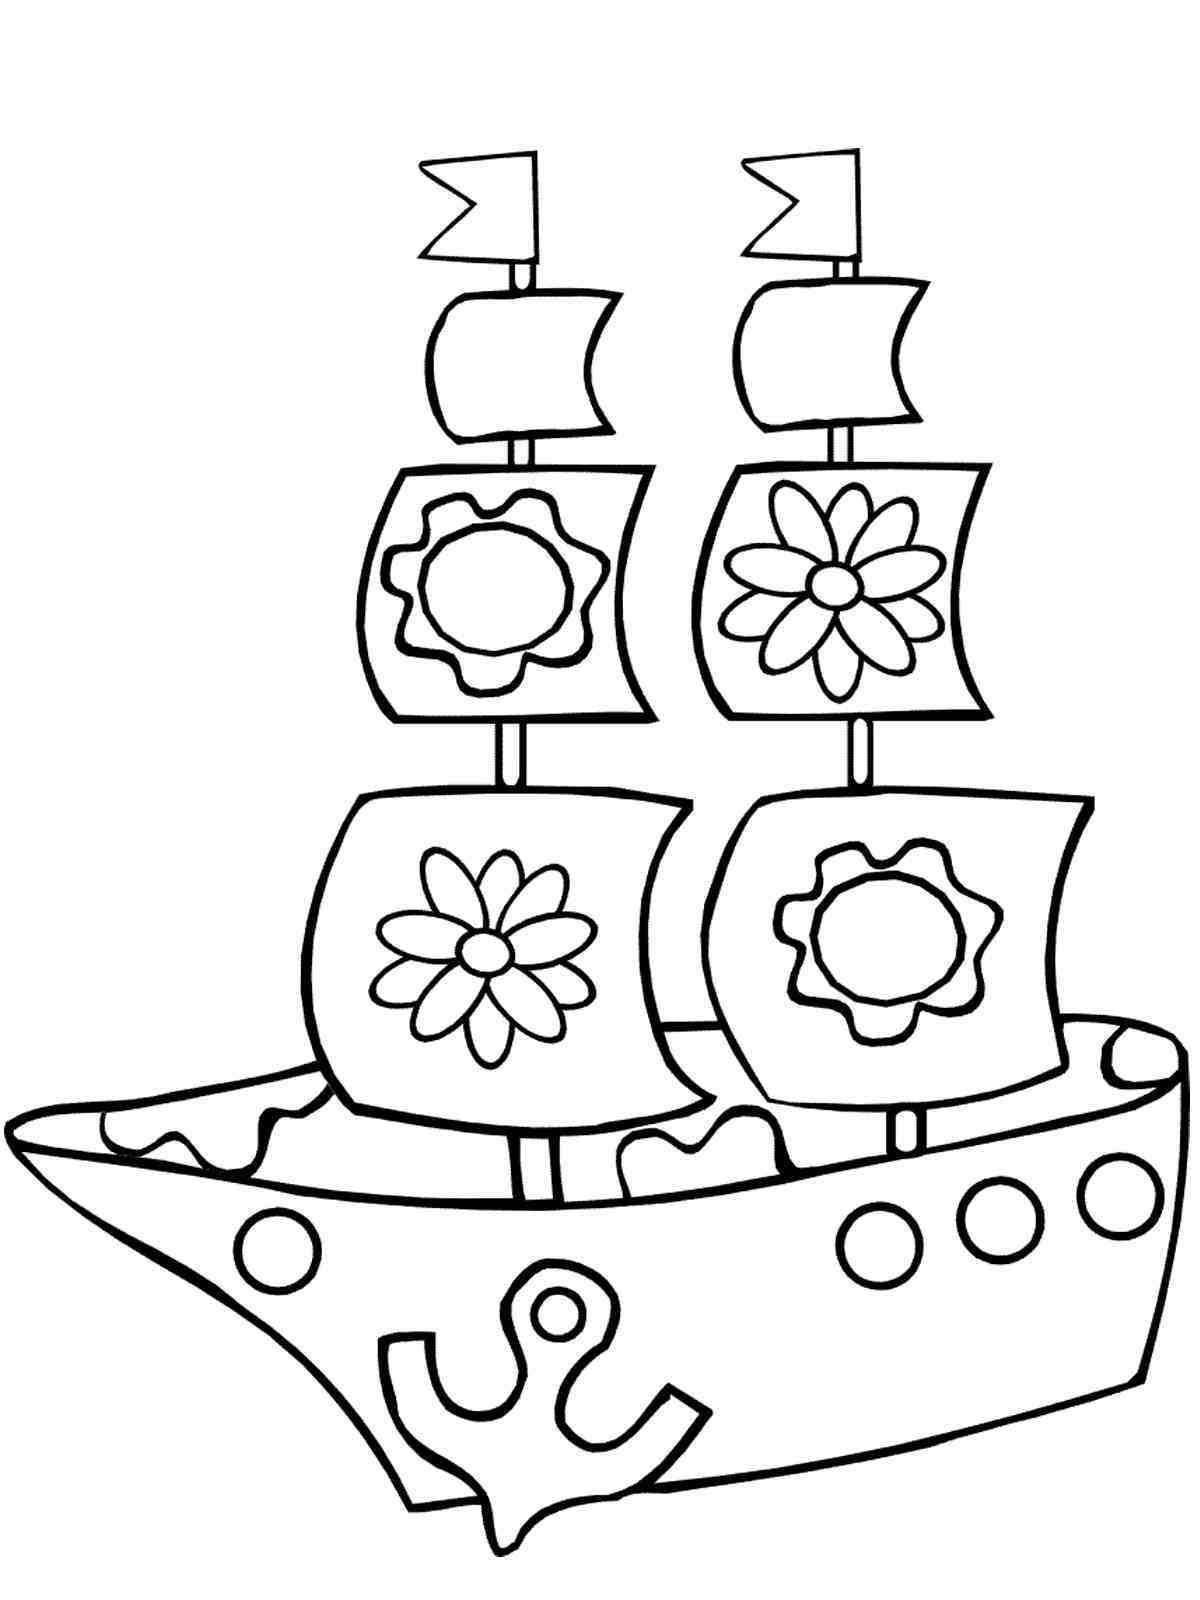 Coloring boat for children 2-3 years old